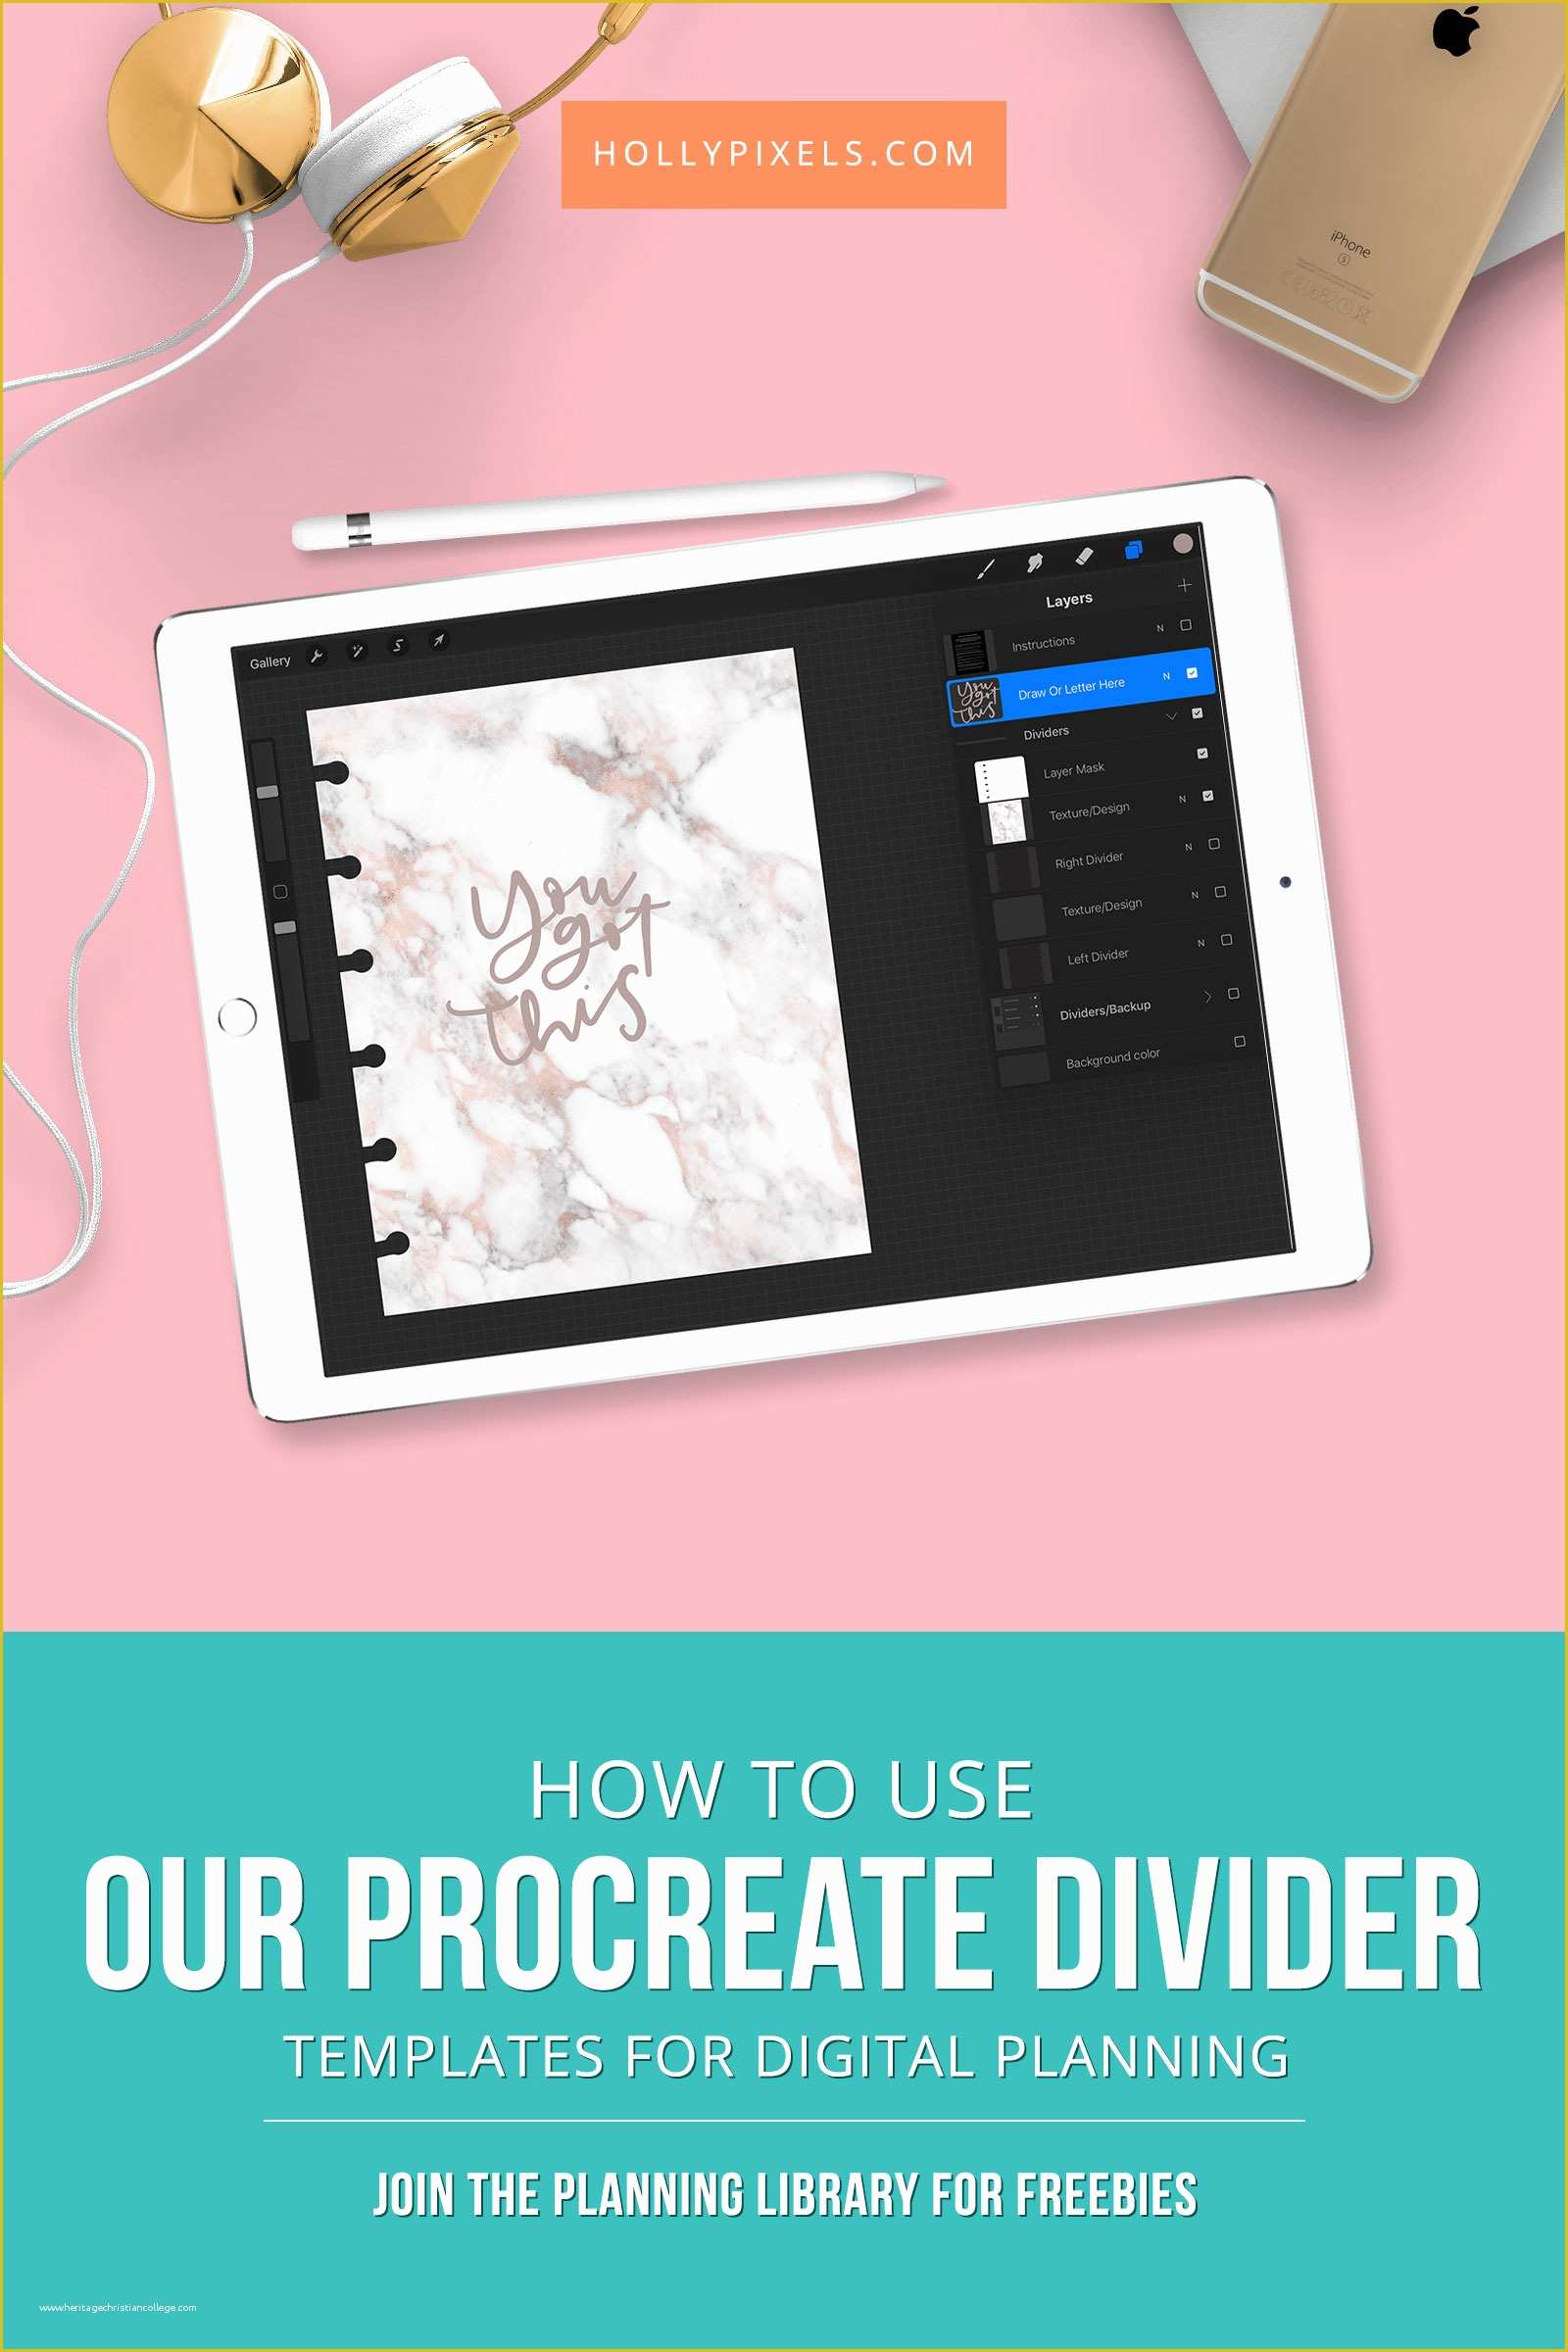 Free Procreate Templates Of How to Use the Procreate Divider Templates for Digital